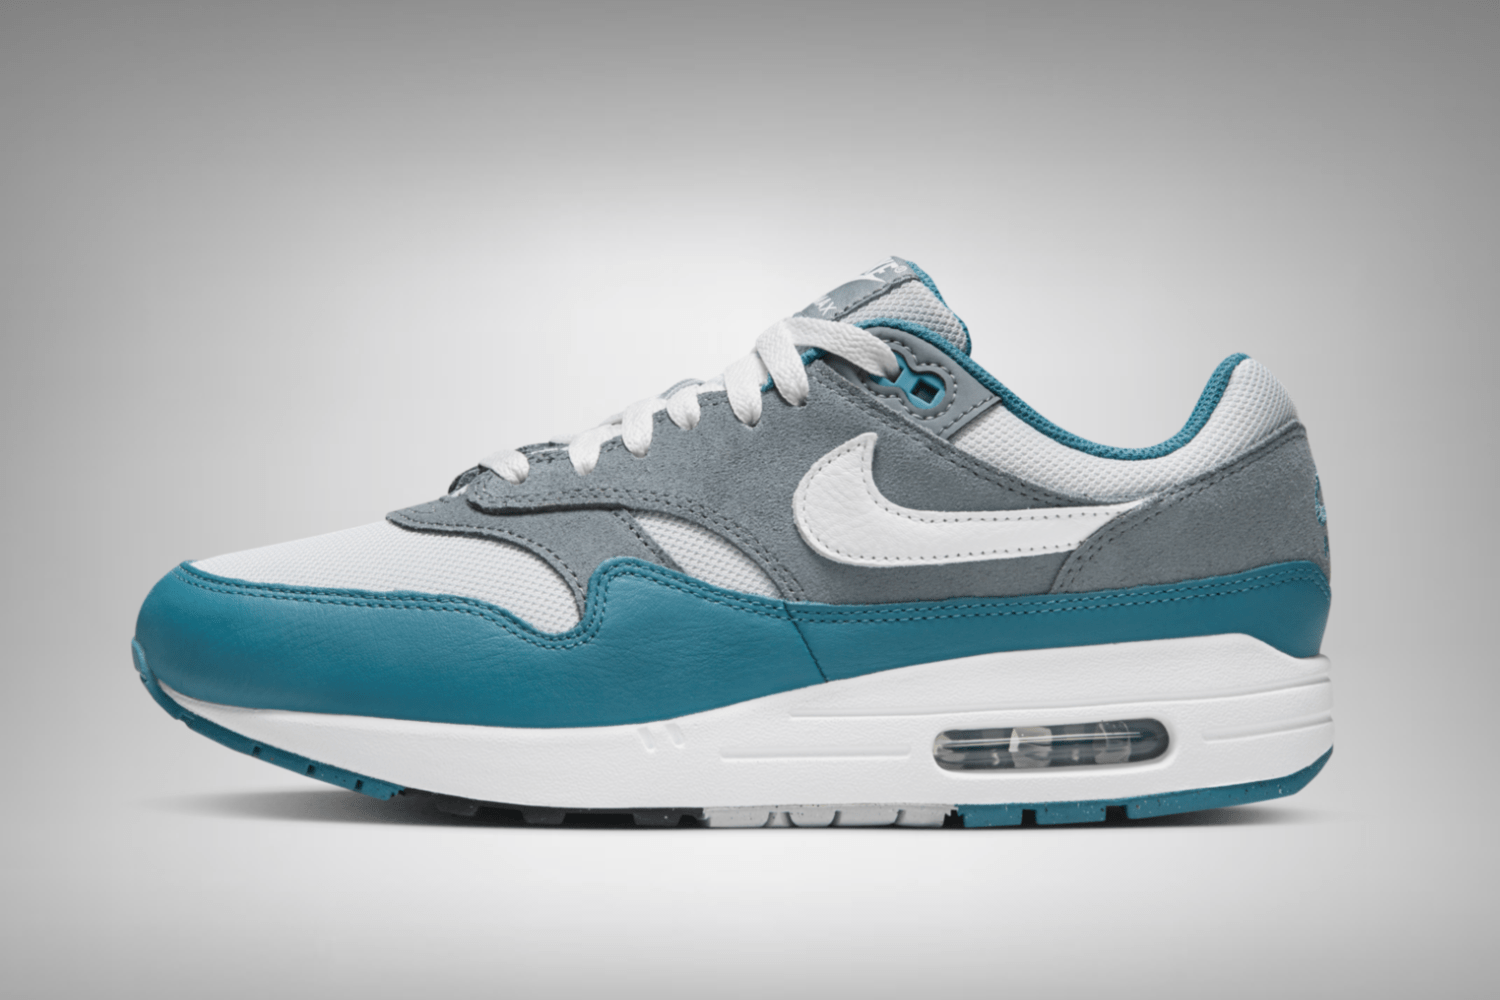 The Nike Air Max 1 'Noise Aqua' is scheduled for autumn 2023